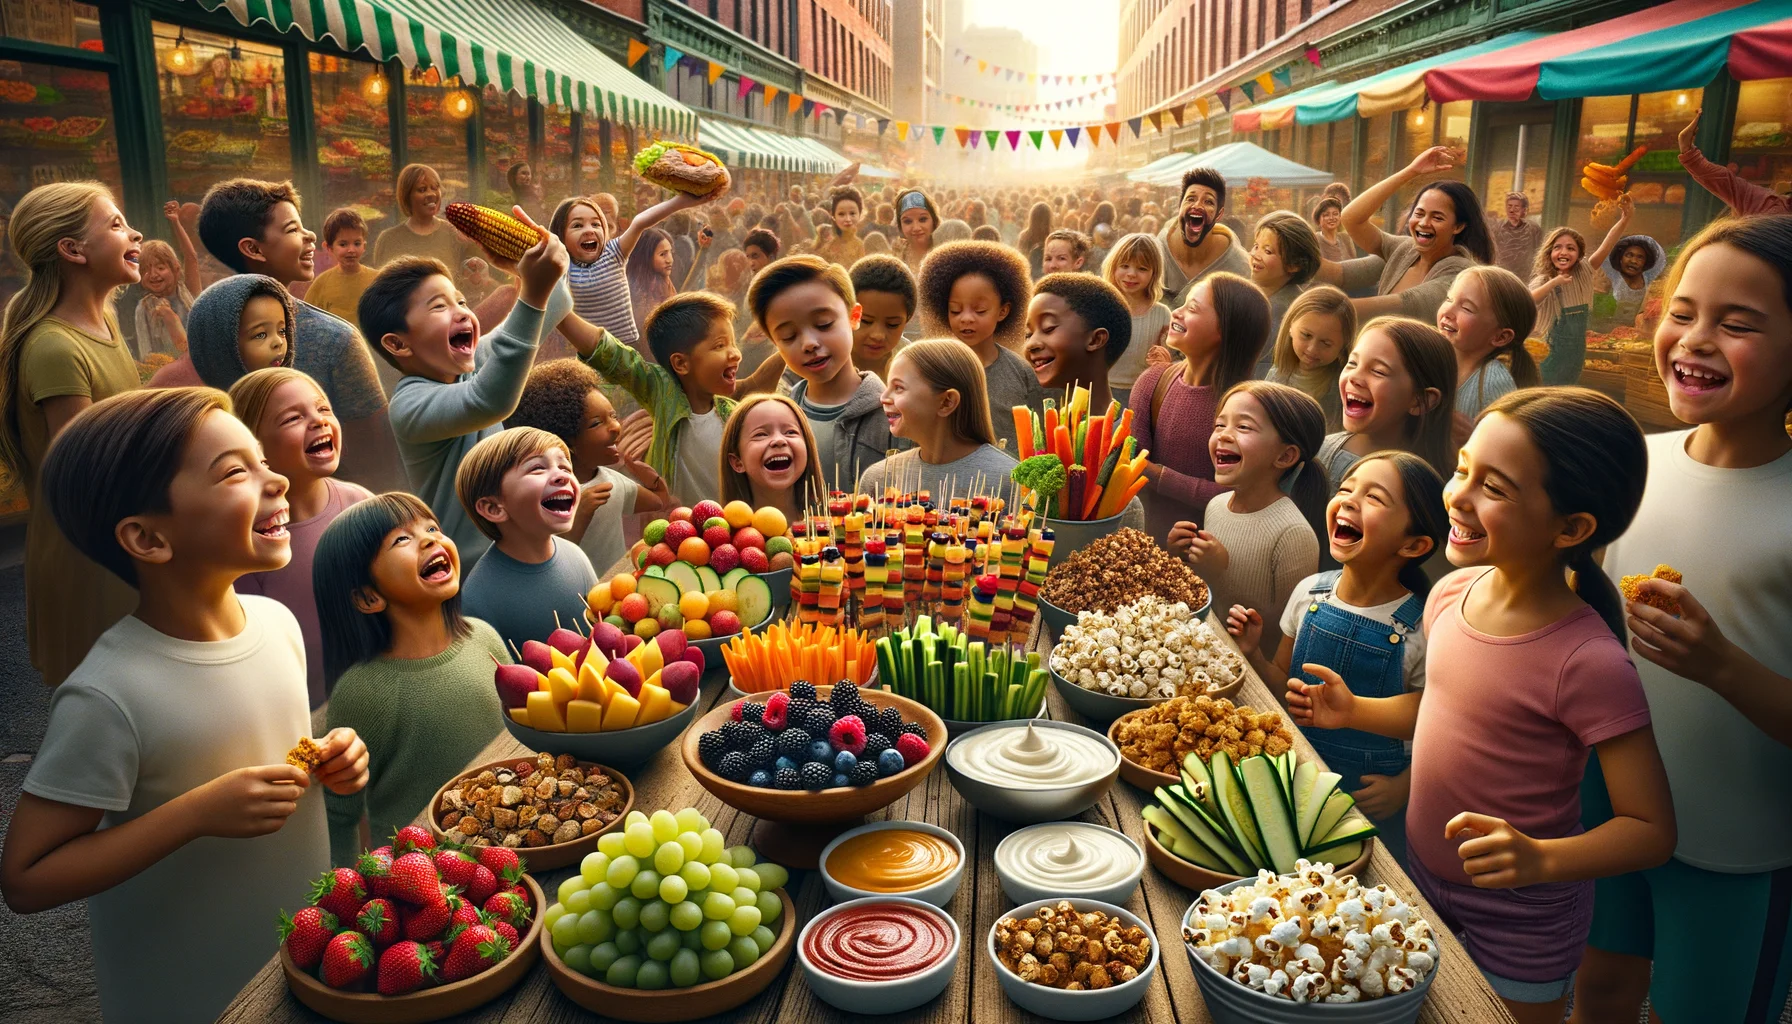 Envision a bustling farmers market scene teeming with colorful and appetizing low-sugar snack options suitable for children. Picture a spectrum of scrumptious treats like vibrant, fresh fruit skewers, crunchy vegetable sticks with spicy hummus dip, fluffy whole grain pop-corns garnished with a light dusting of sea salt, and nutty, satiating trail mix. The scene is filled with children of various descents - Caucasian, Hispanic, Black, Middle-Eastern, South Asian, showing delighted expressions as they explore these wholesome options. Packed with delight, vibrancy, and realism. The scene is intended to be heartwarming, funny with children playfully trying to reach for the snacks.